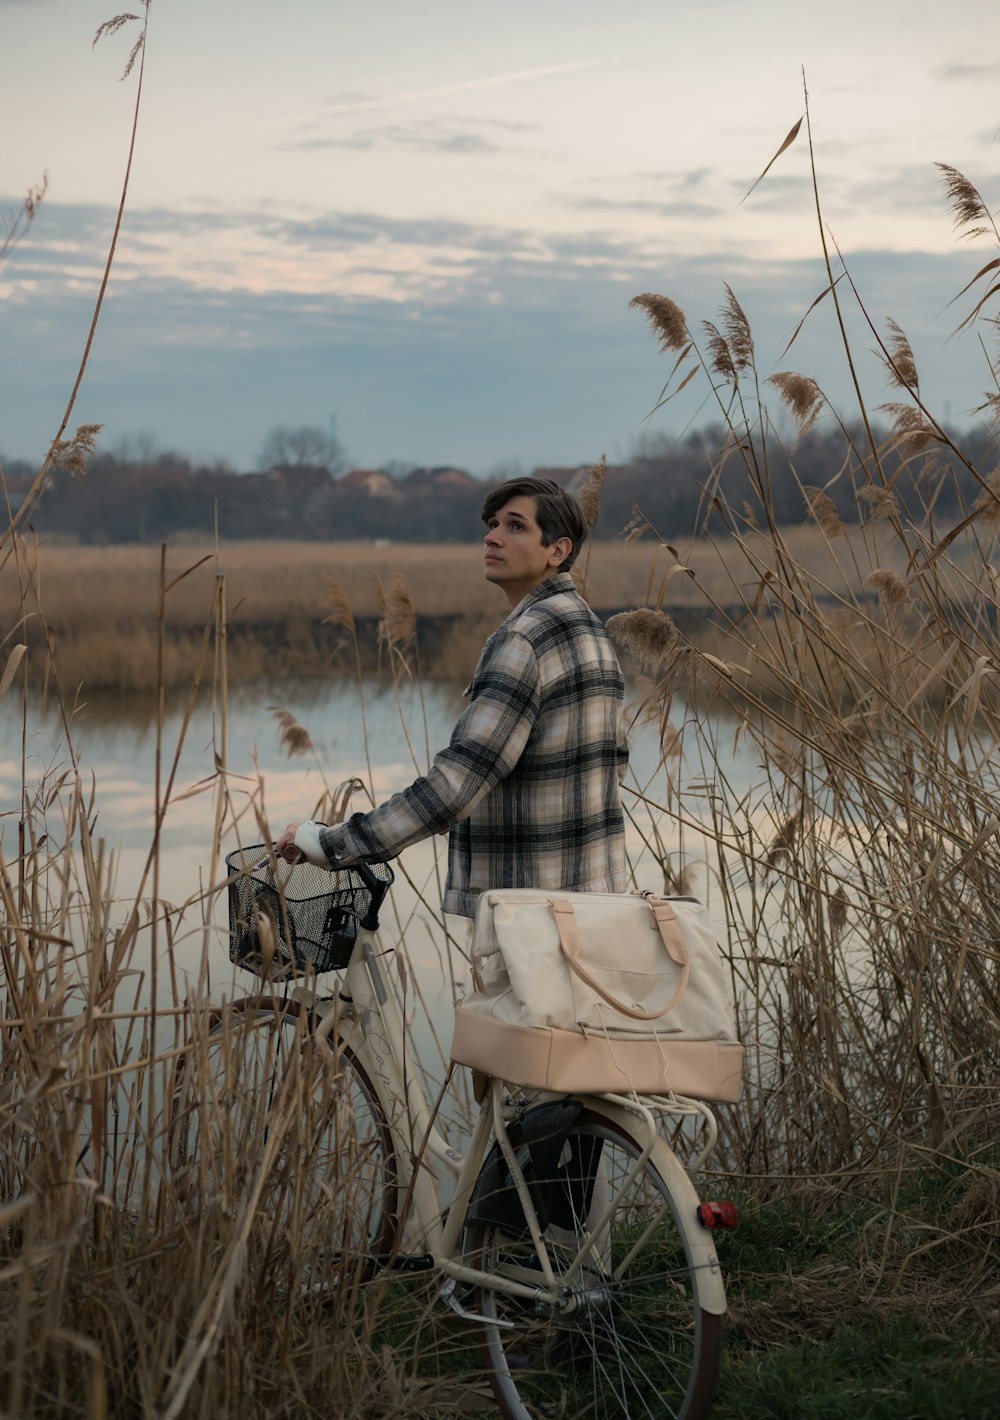 a man standing next to a bike near a body of water